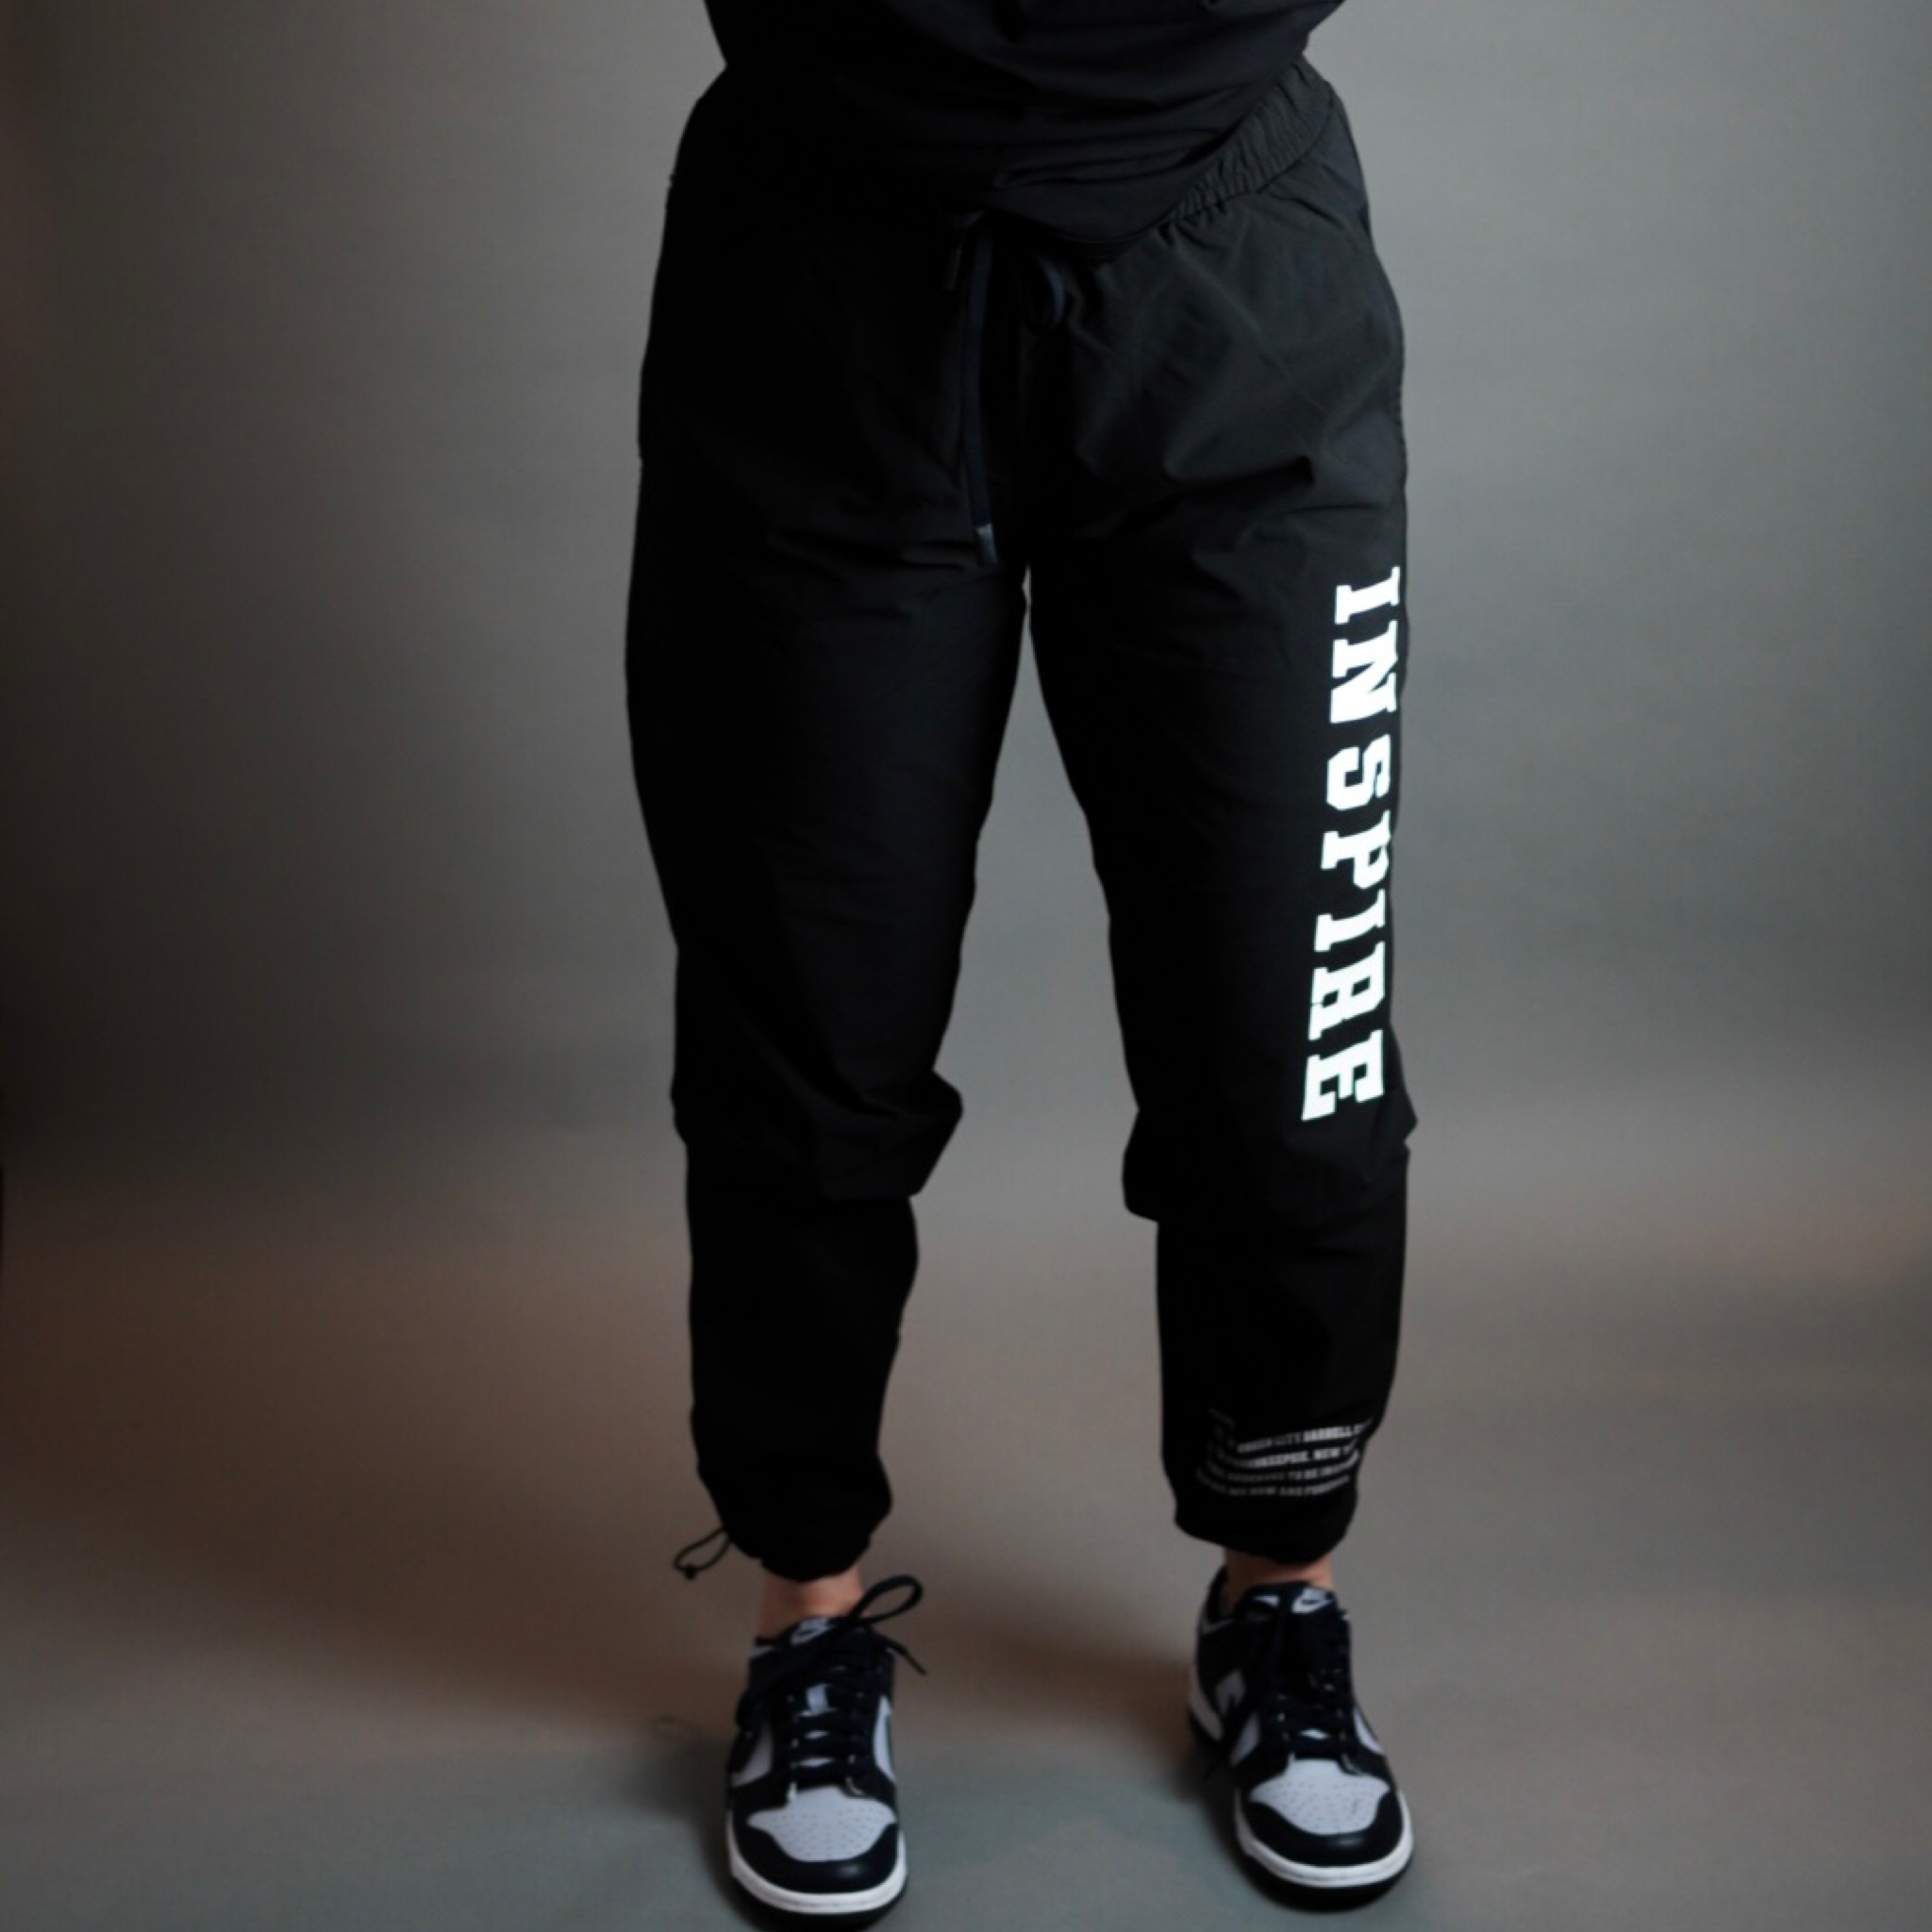 THE INSPIRE TROUSERS // BLACK